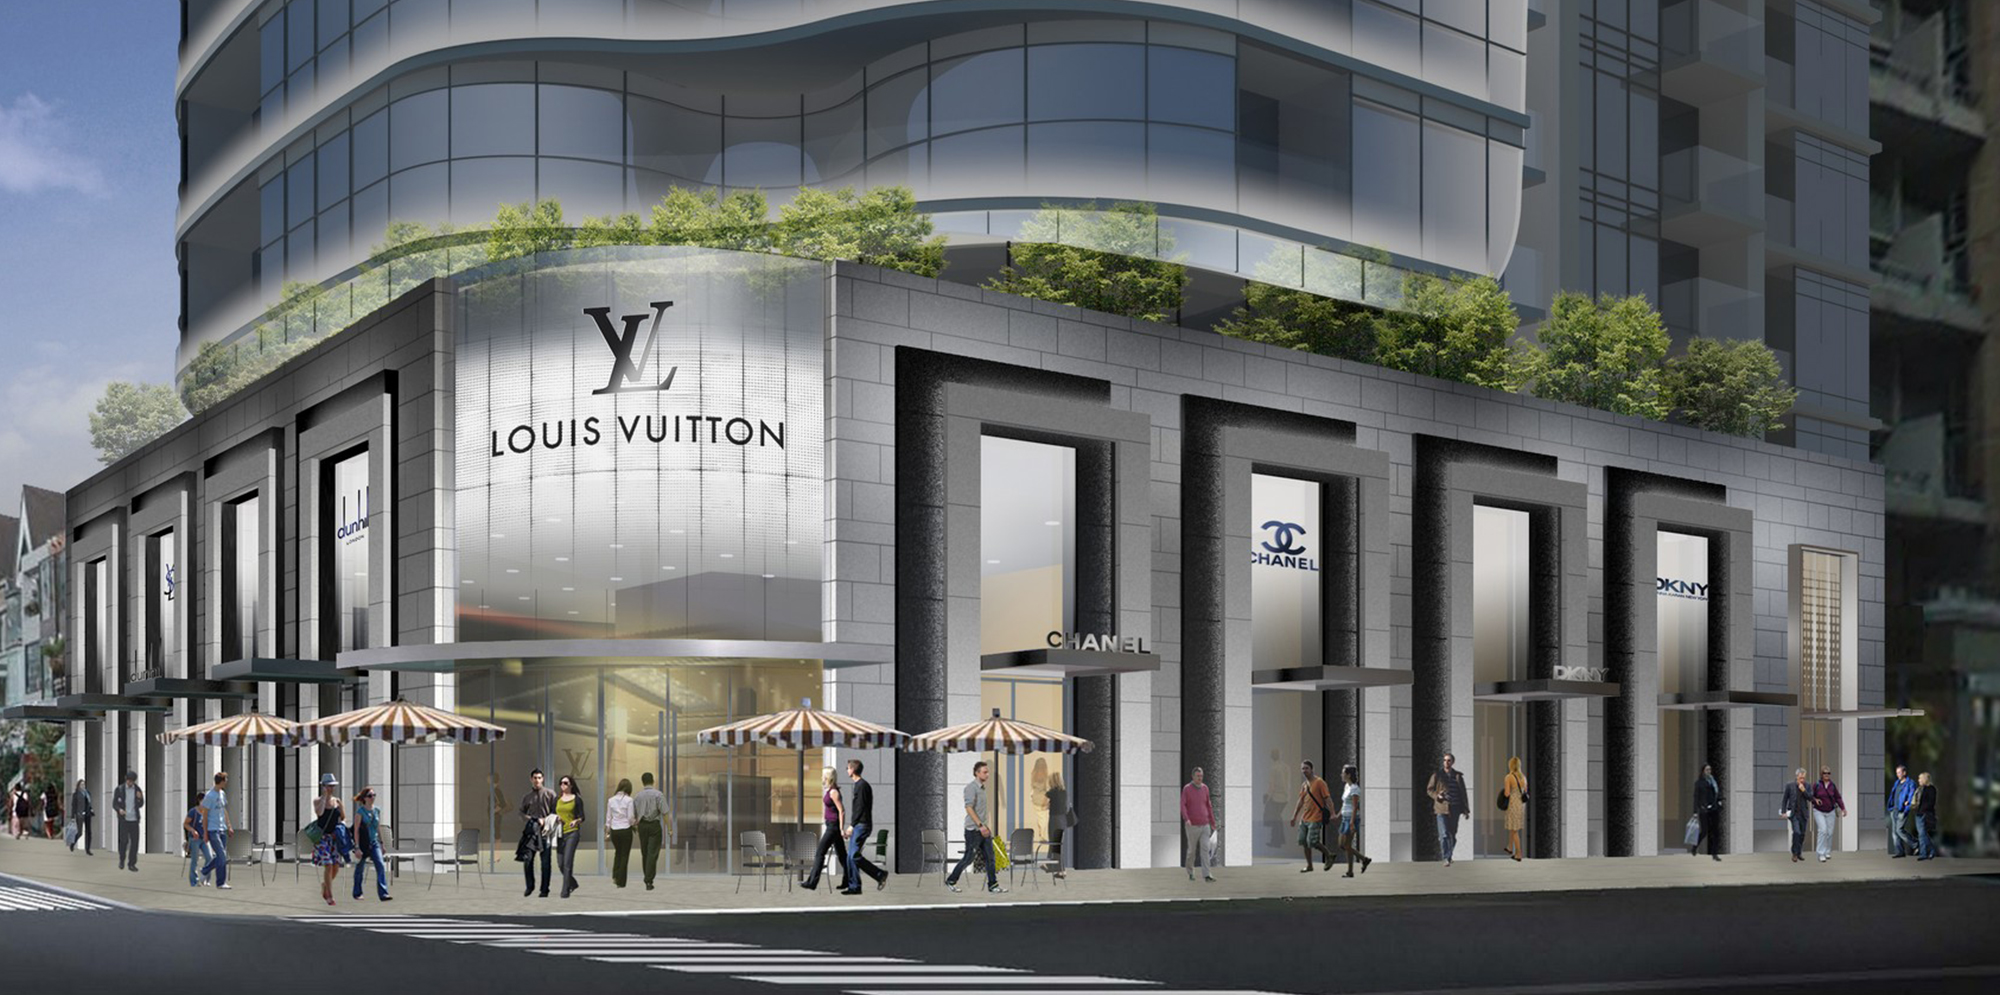 Louis Vuitton and Chanel part of Minto Yorkville Park exterior in Toronto